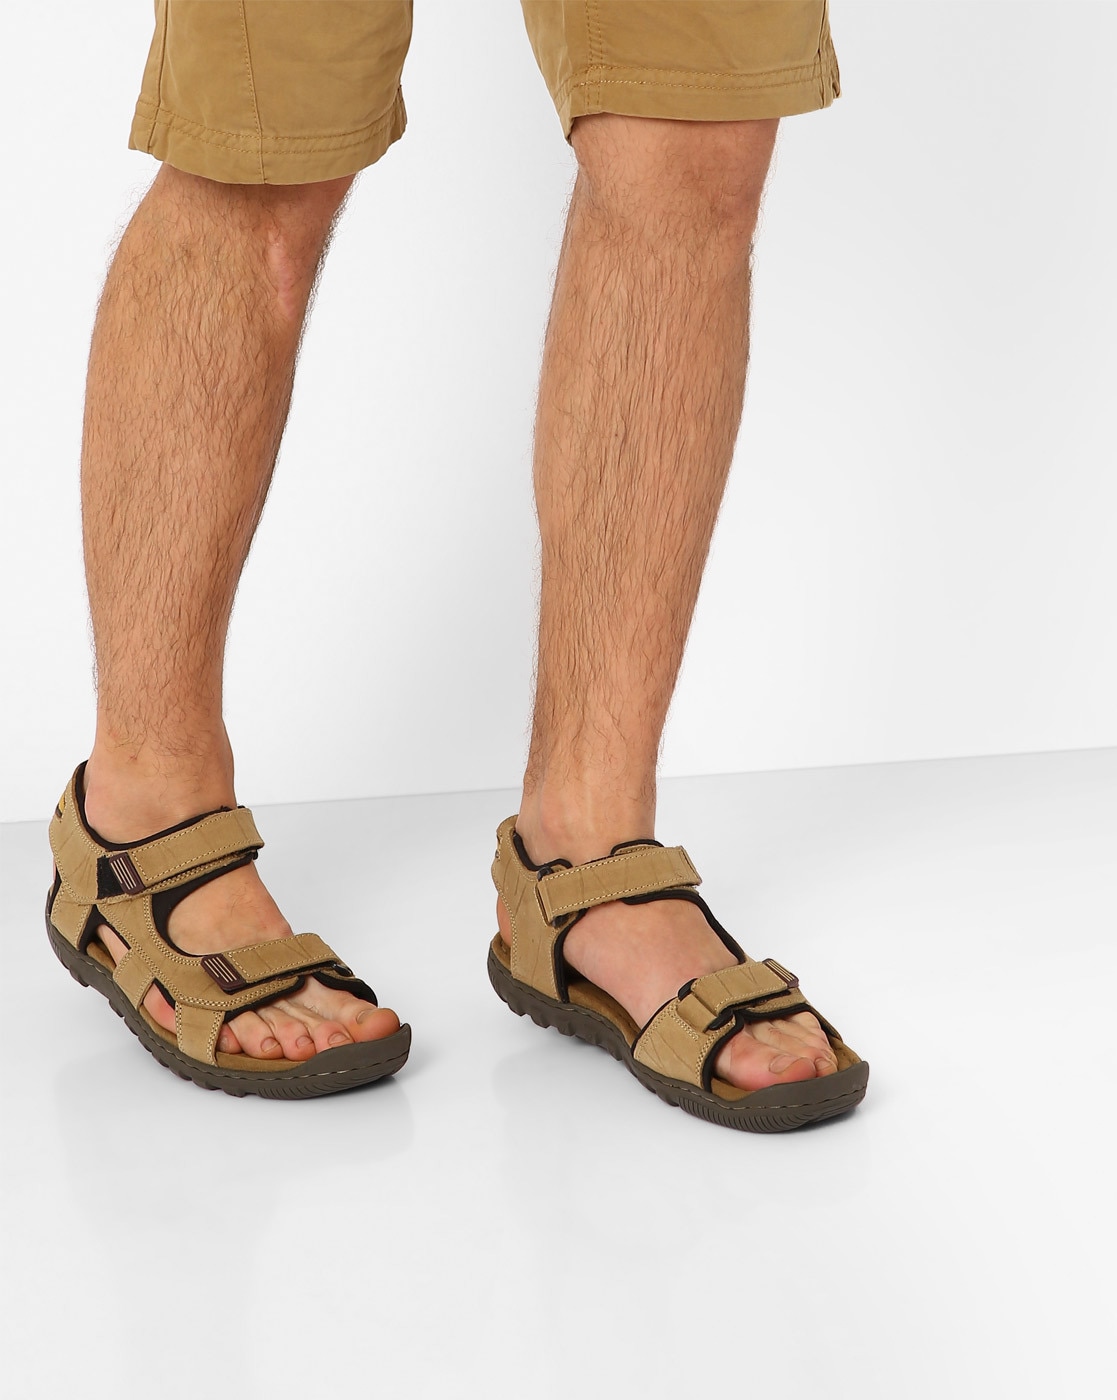 Buy Khaki Casual Sandals for Men by 